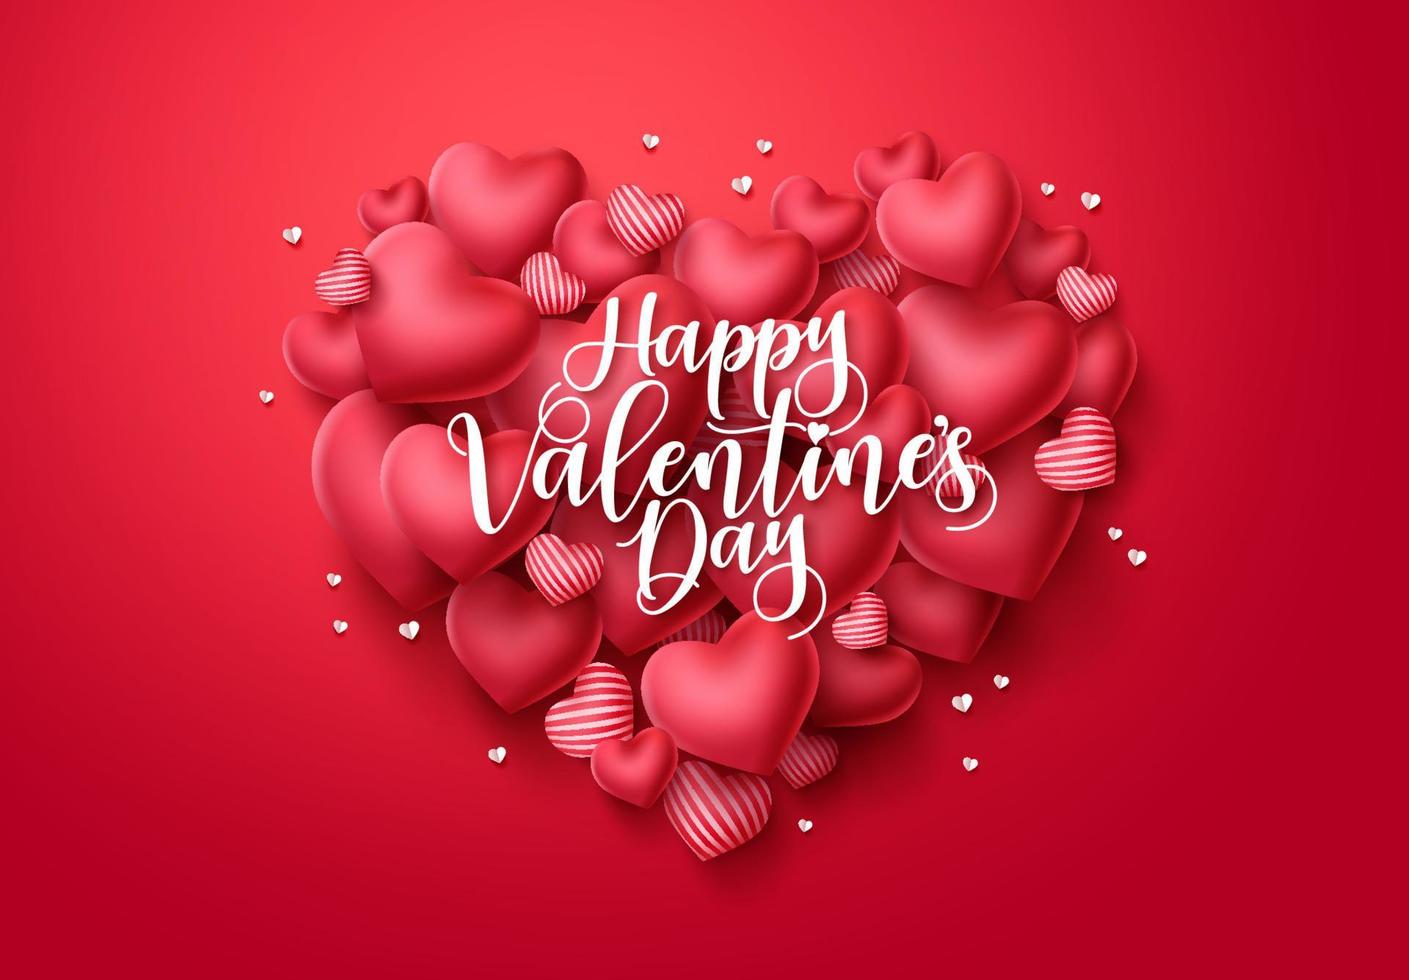 Valentines day hearts vector greeting card. Happy valentines day text with heart shape elements in red background. Vector illustration.